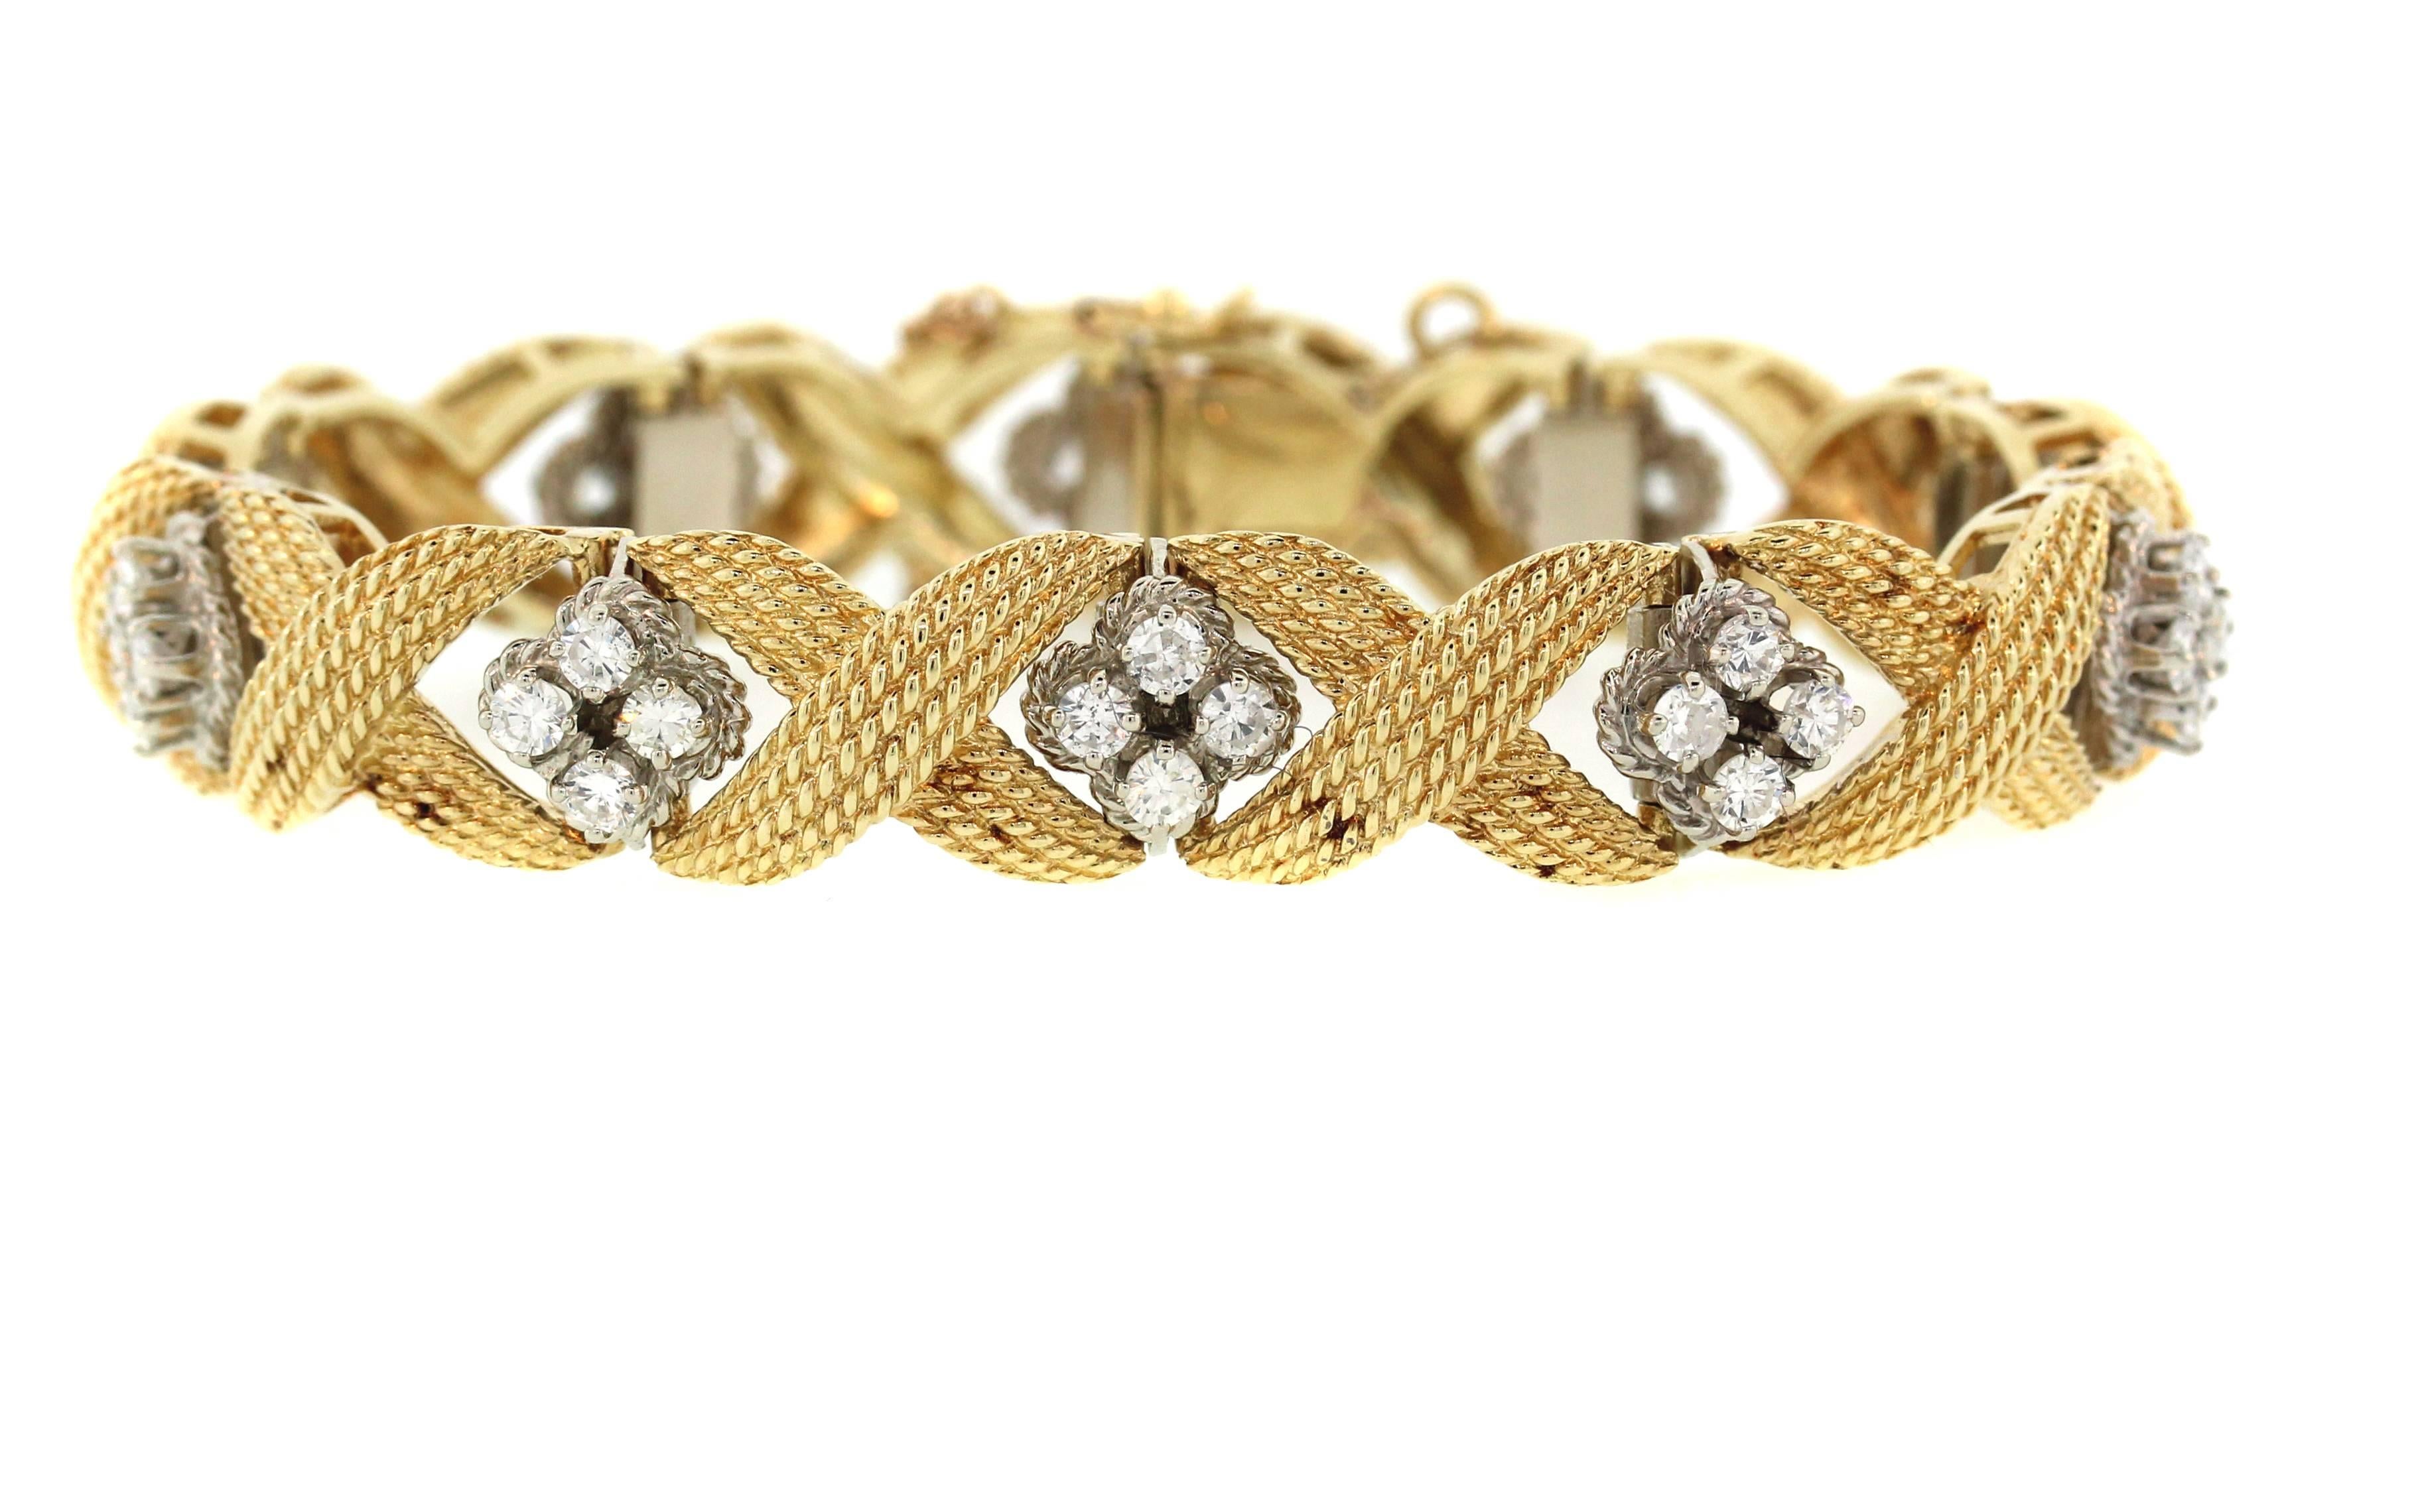 18K Gold Bracelet with Diamond Clusters

Apprx. 3.00ct Diamonds throughout entire bracelet

41.1 grams solid 18k gold

7 inches length, 0.45 inch width

Push Button clasp with chain as safety

Estate
